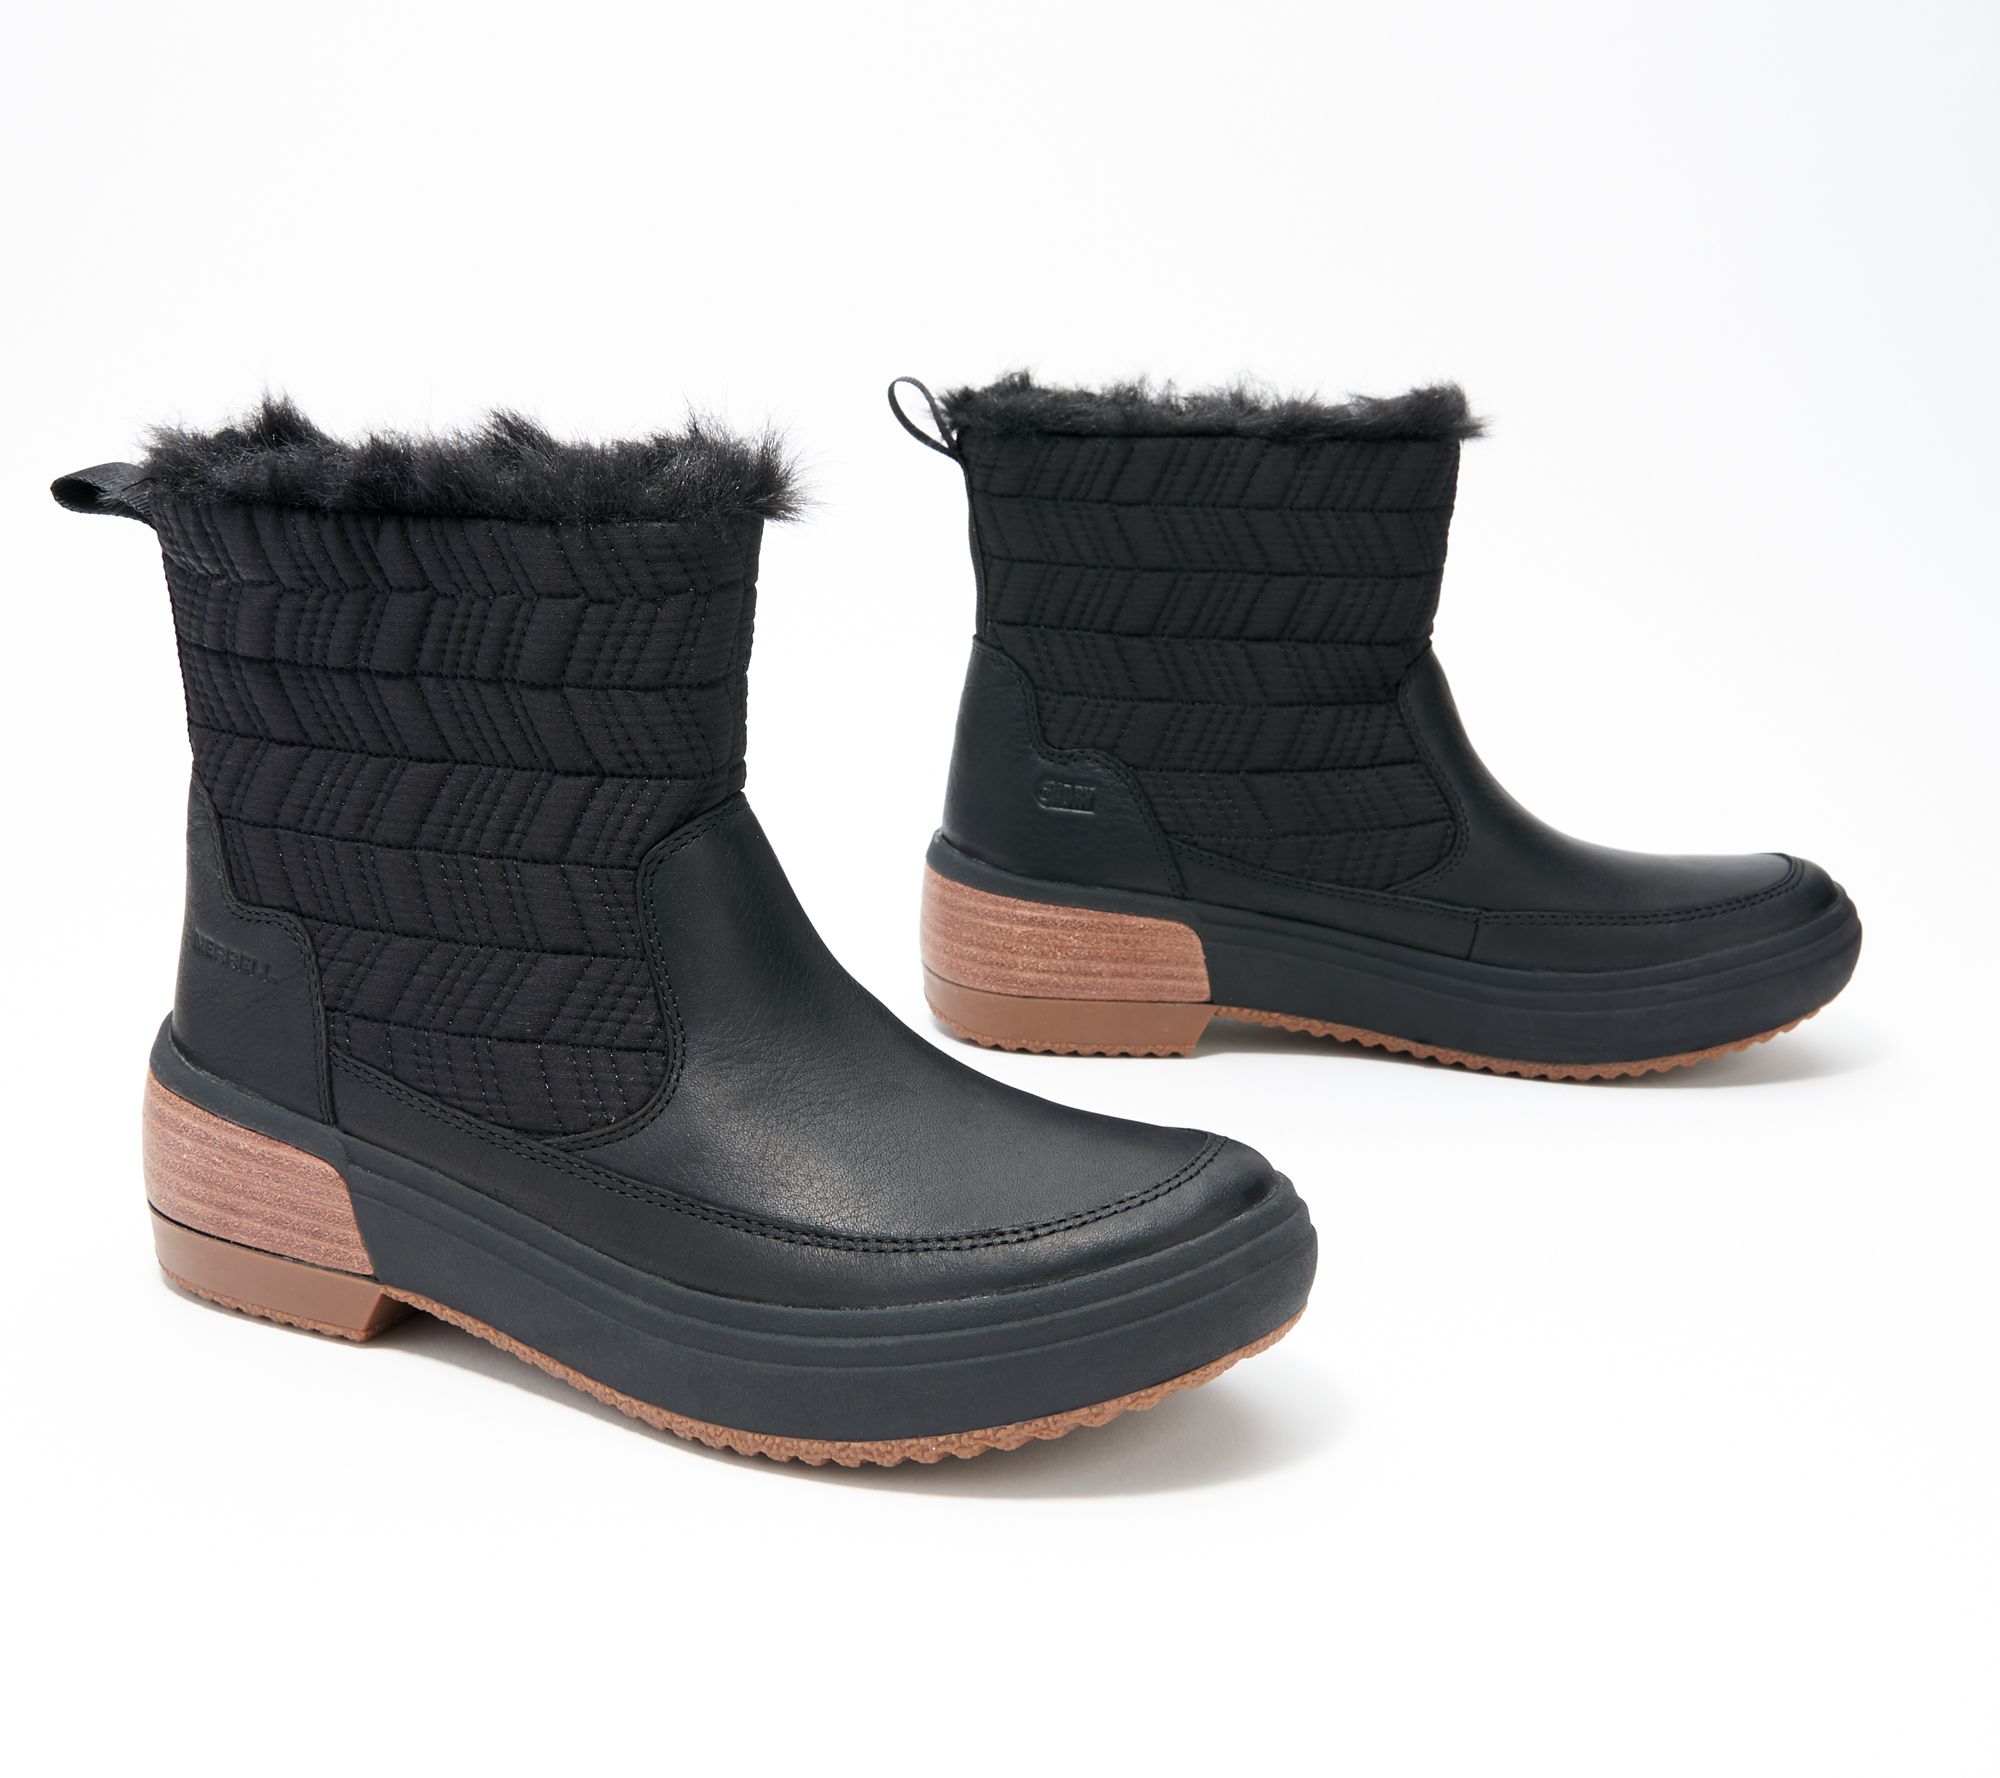 Merrell Waterproof Ankle Boots Haven - QVC.com